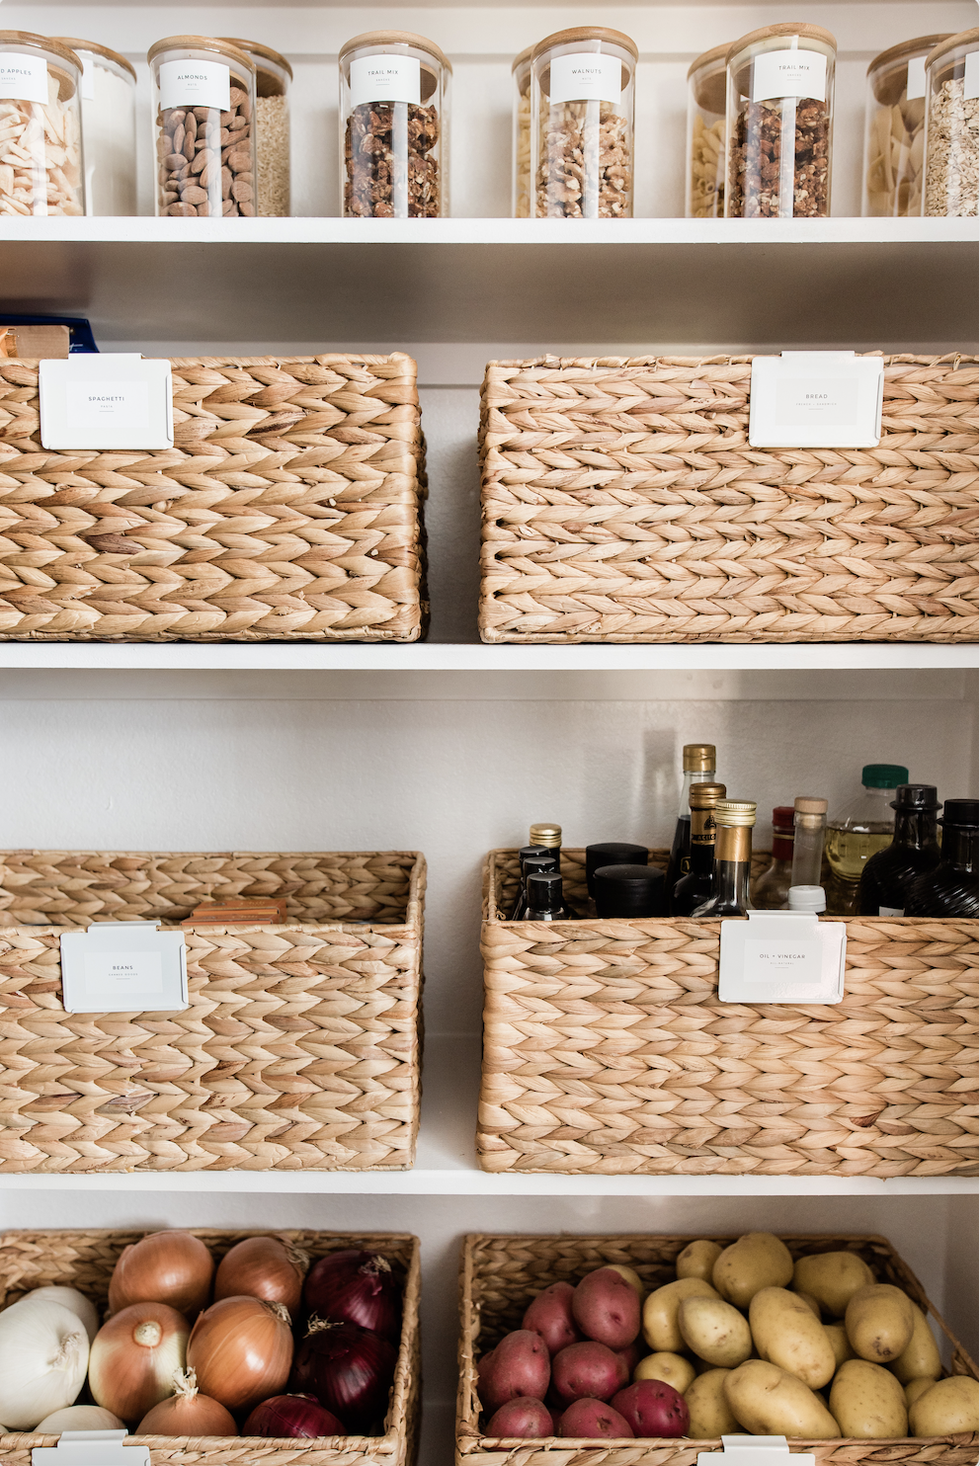 17 pantry ideas for a stylish and organised kitchen - The English Home